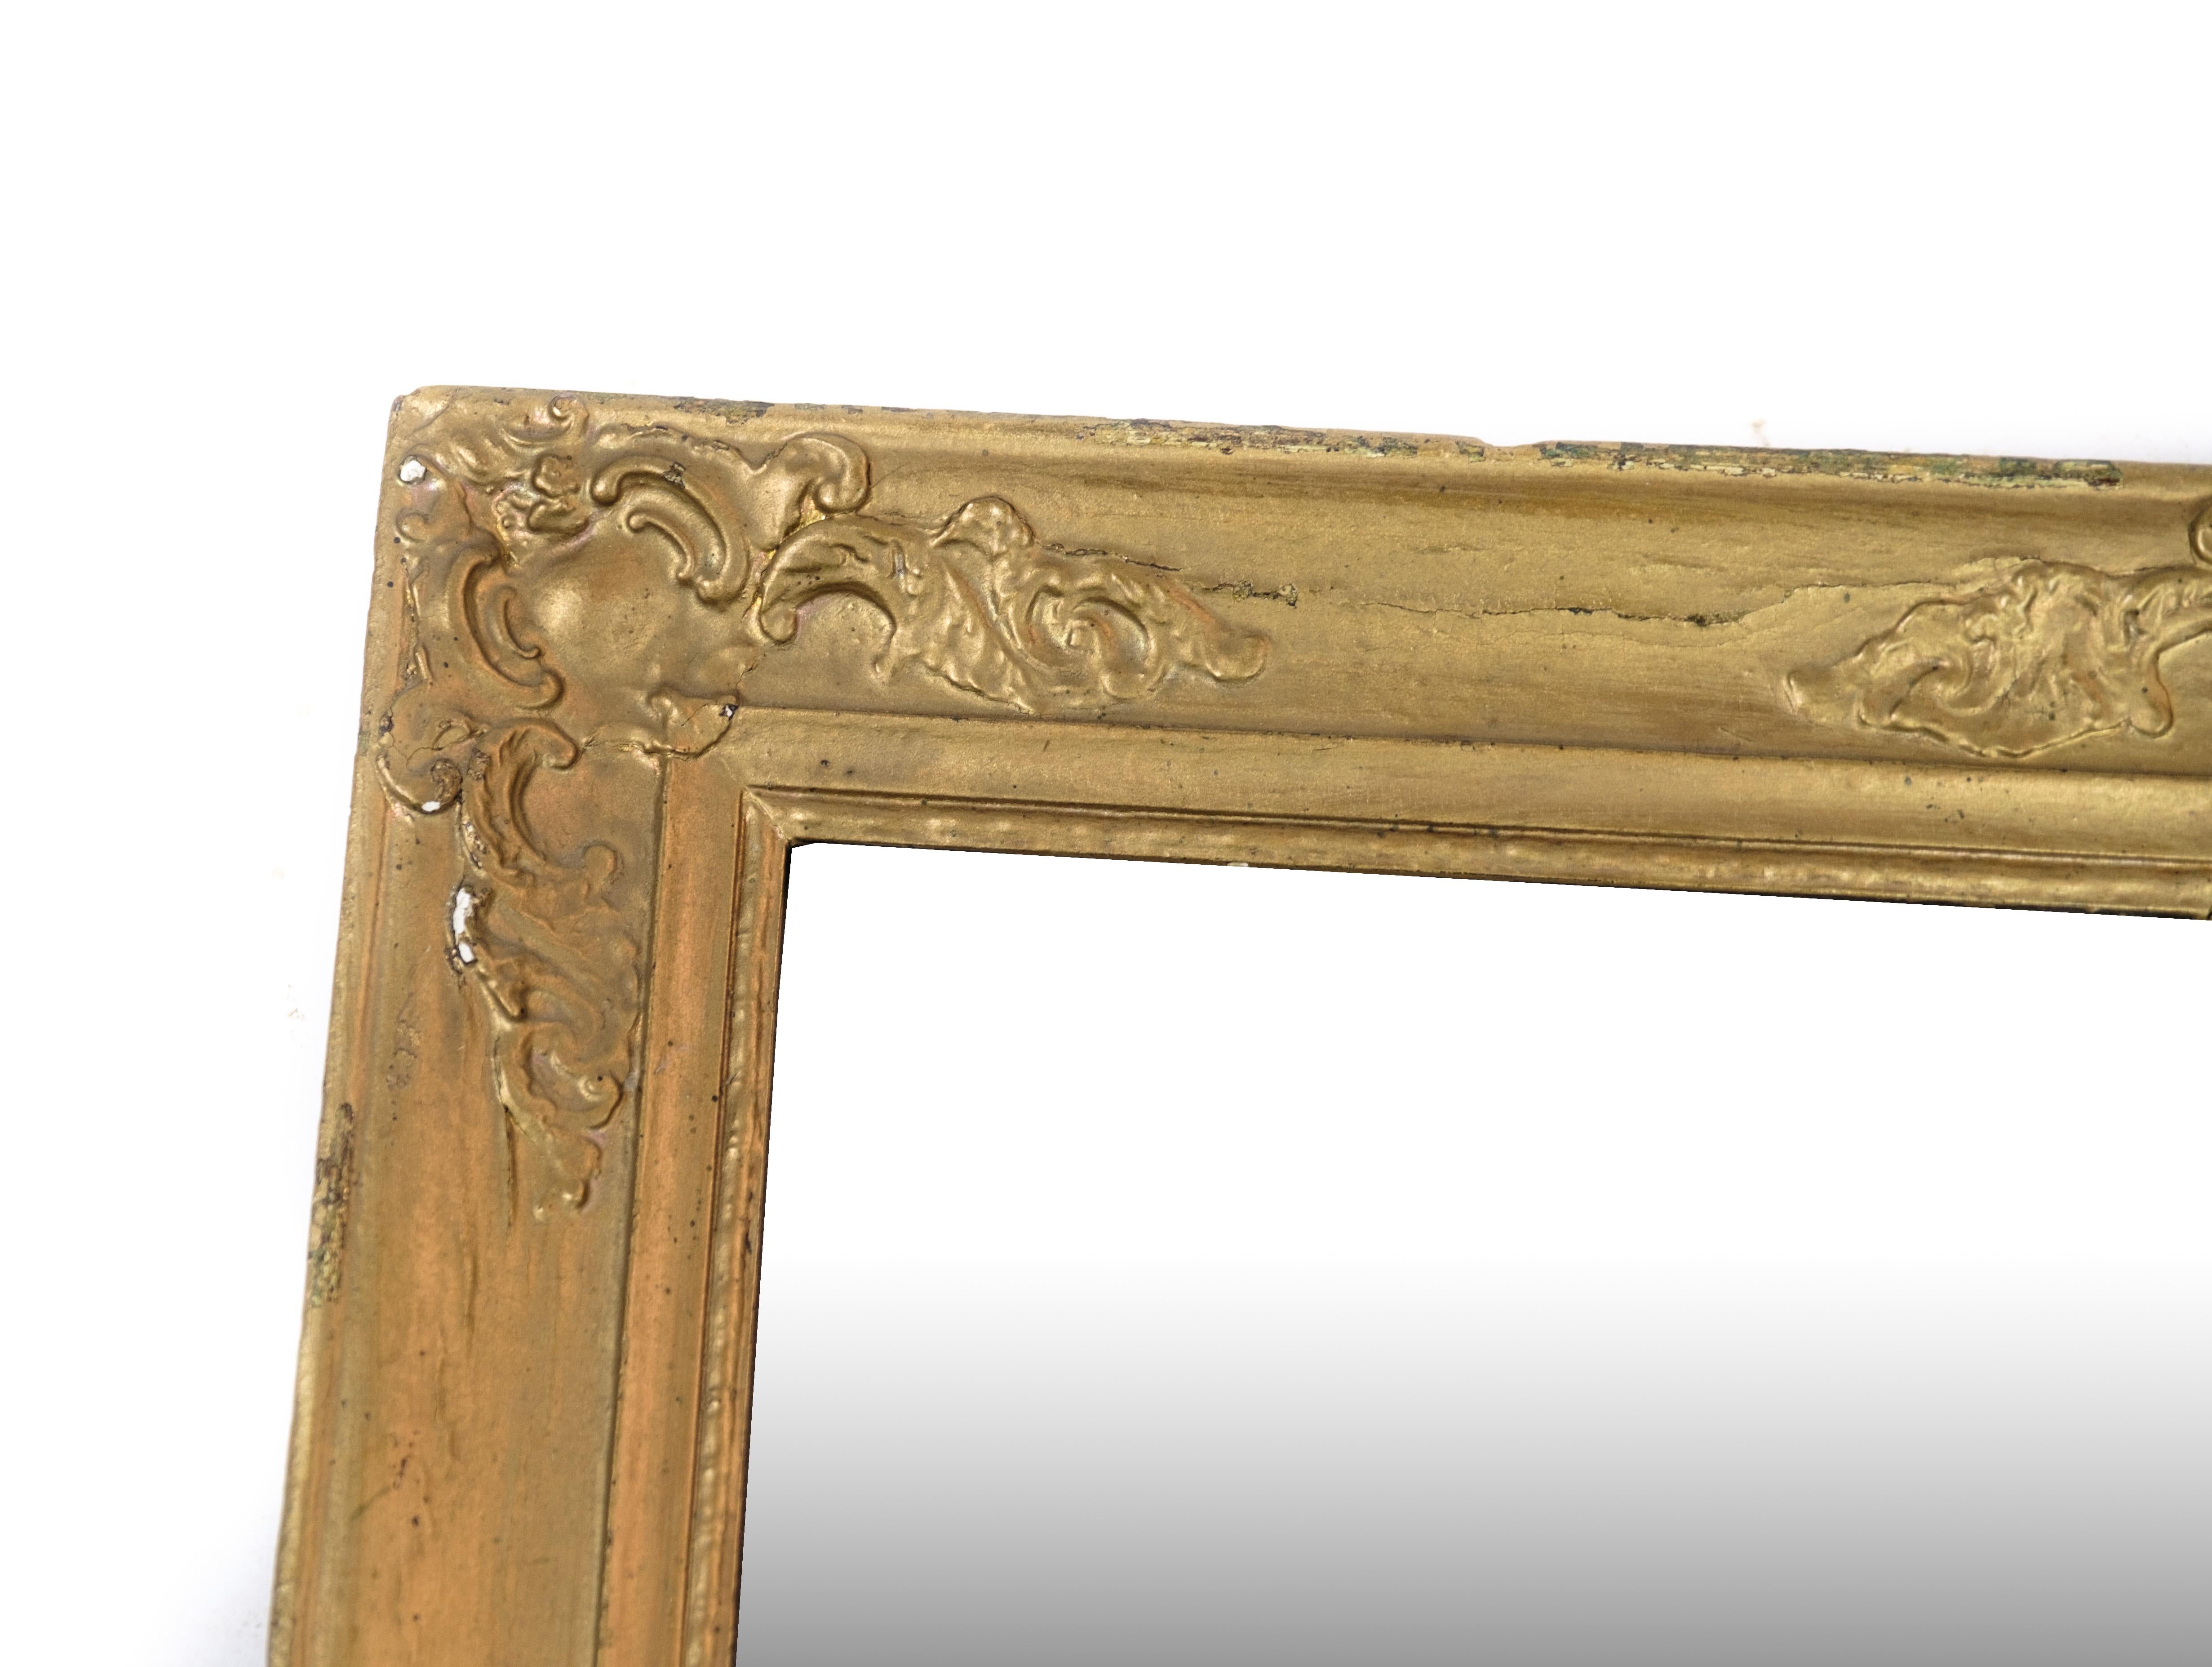 Mirror with a gilded frame from the year 1890.
Measurements in cm: H:38.5 W:33

This product will be inspected thoroughly at our professional workshop by our educated employees, who assure the product quality